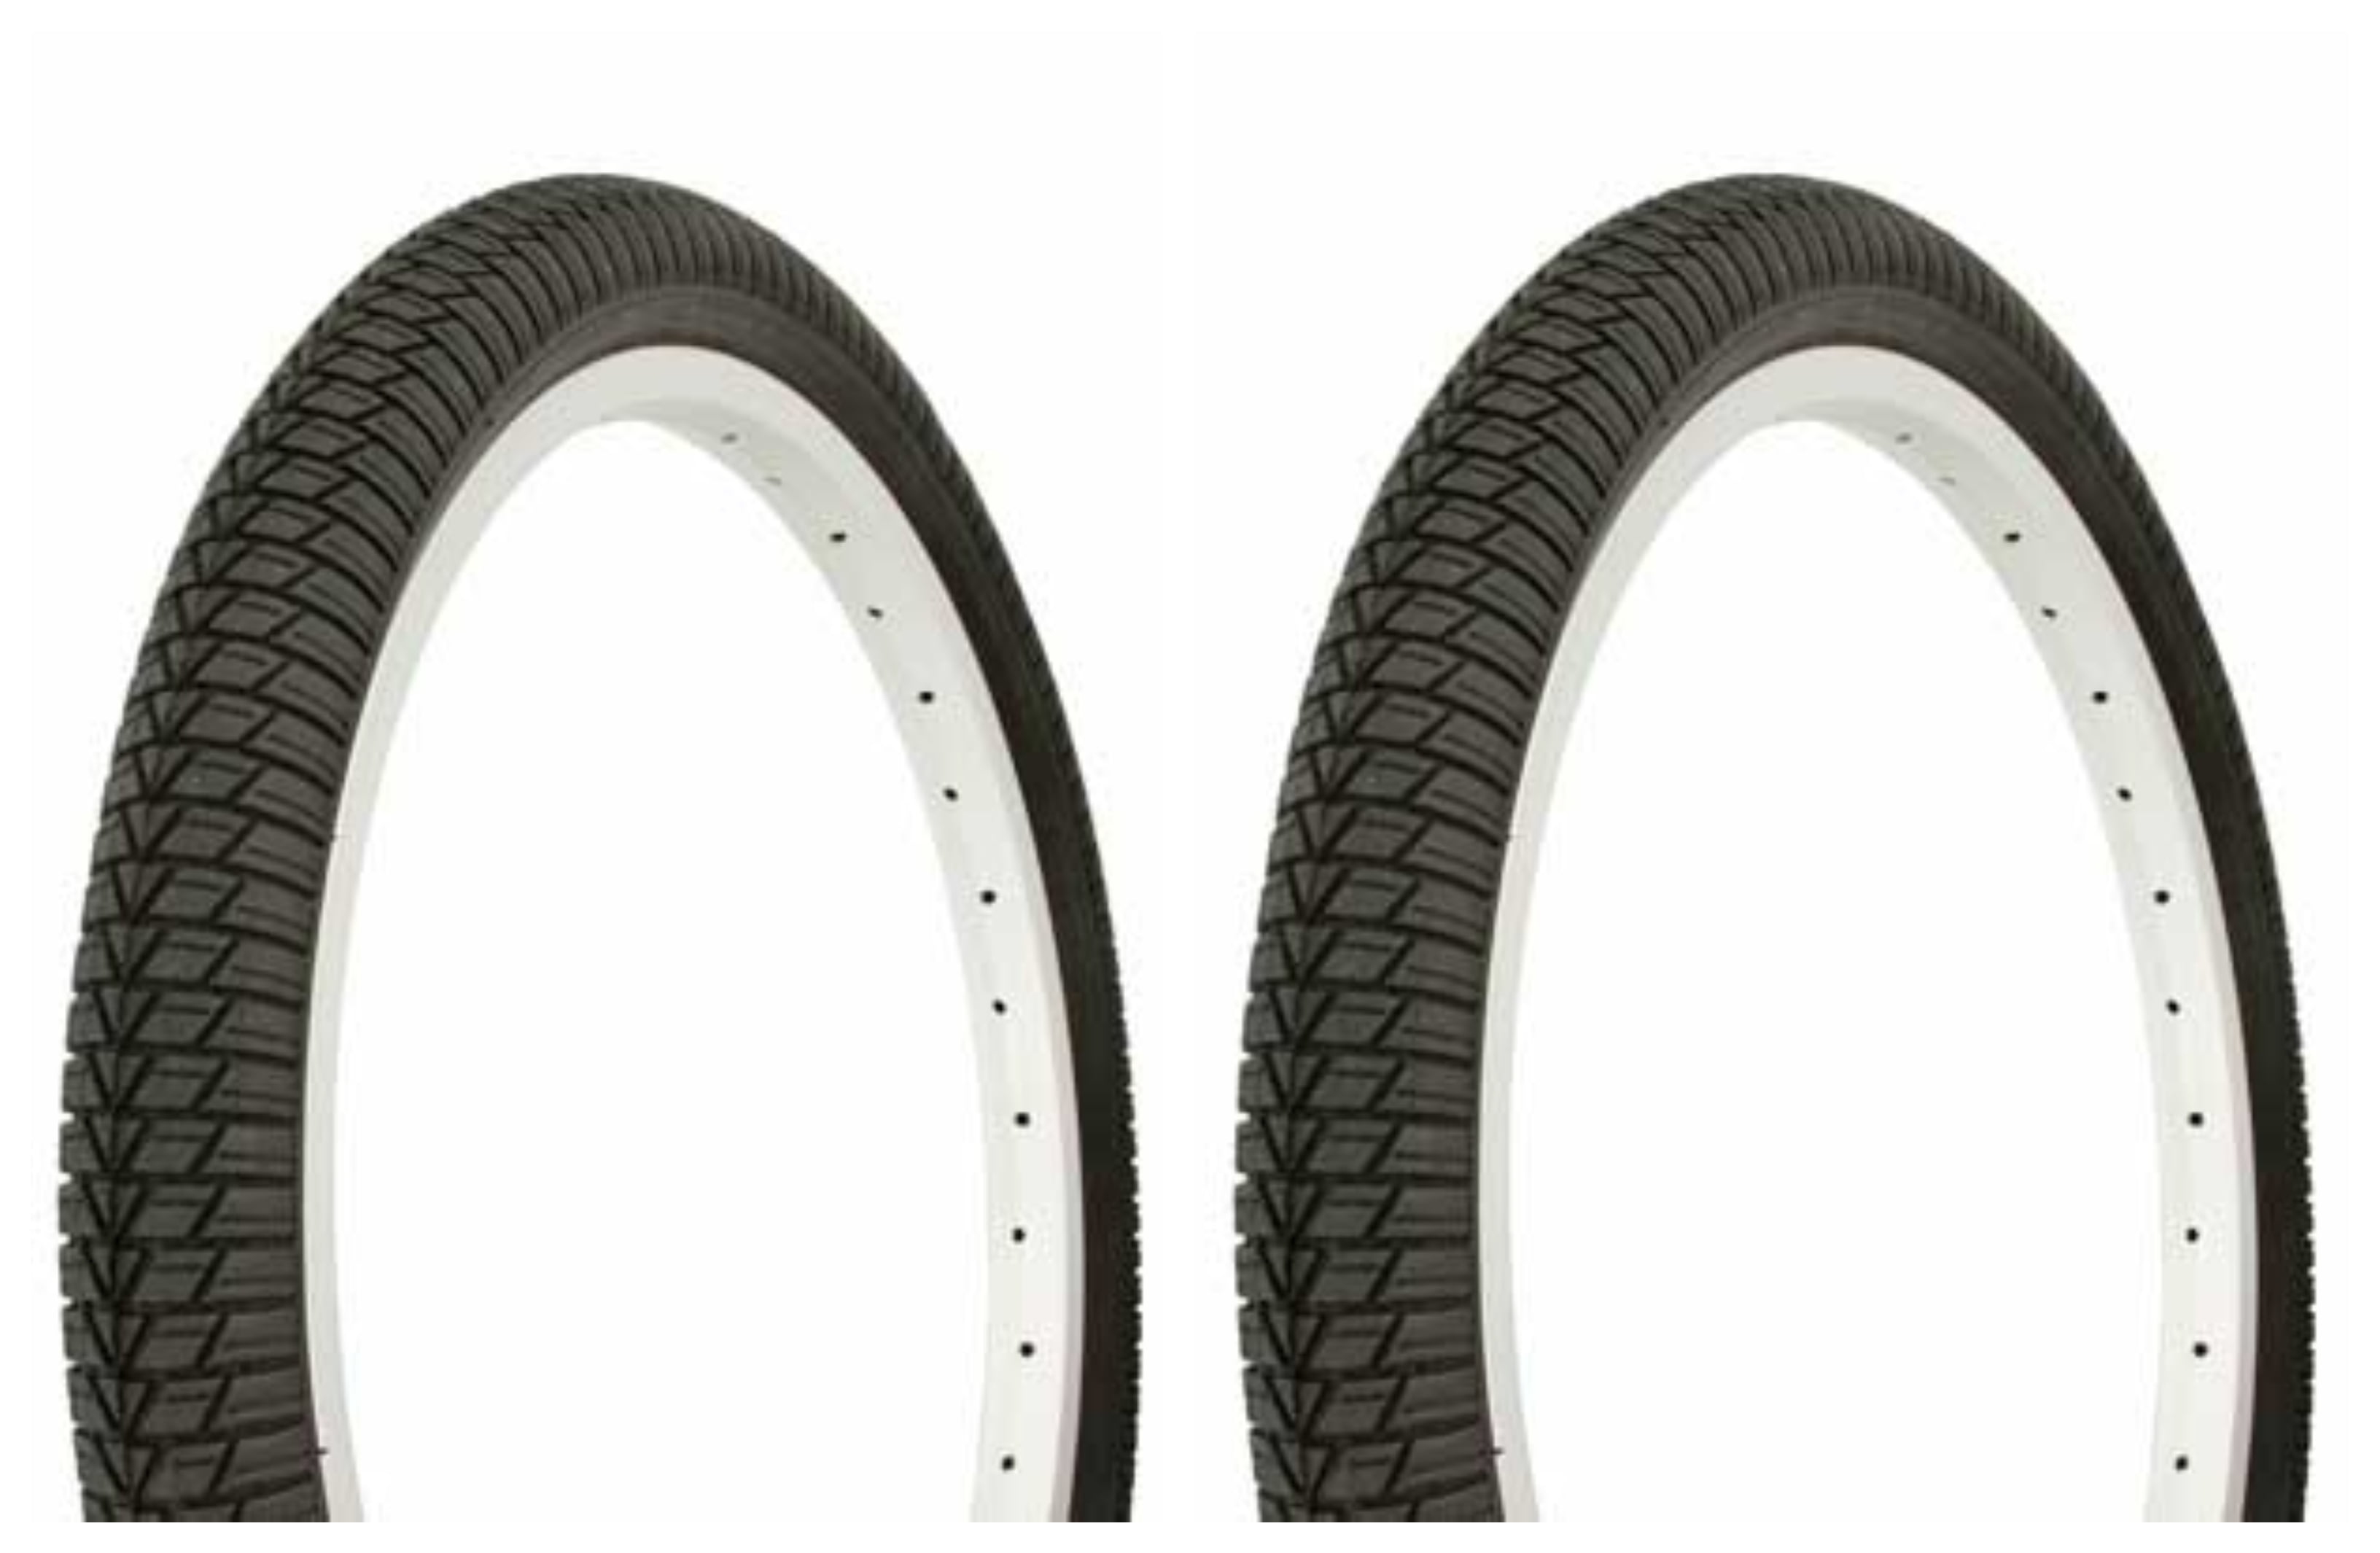 NEW BICYCLE DURO TIRE IN 18 X 2.125 BLACK/BLACK SIDE WALL IN COMP III STYLE! 